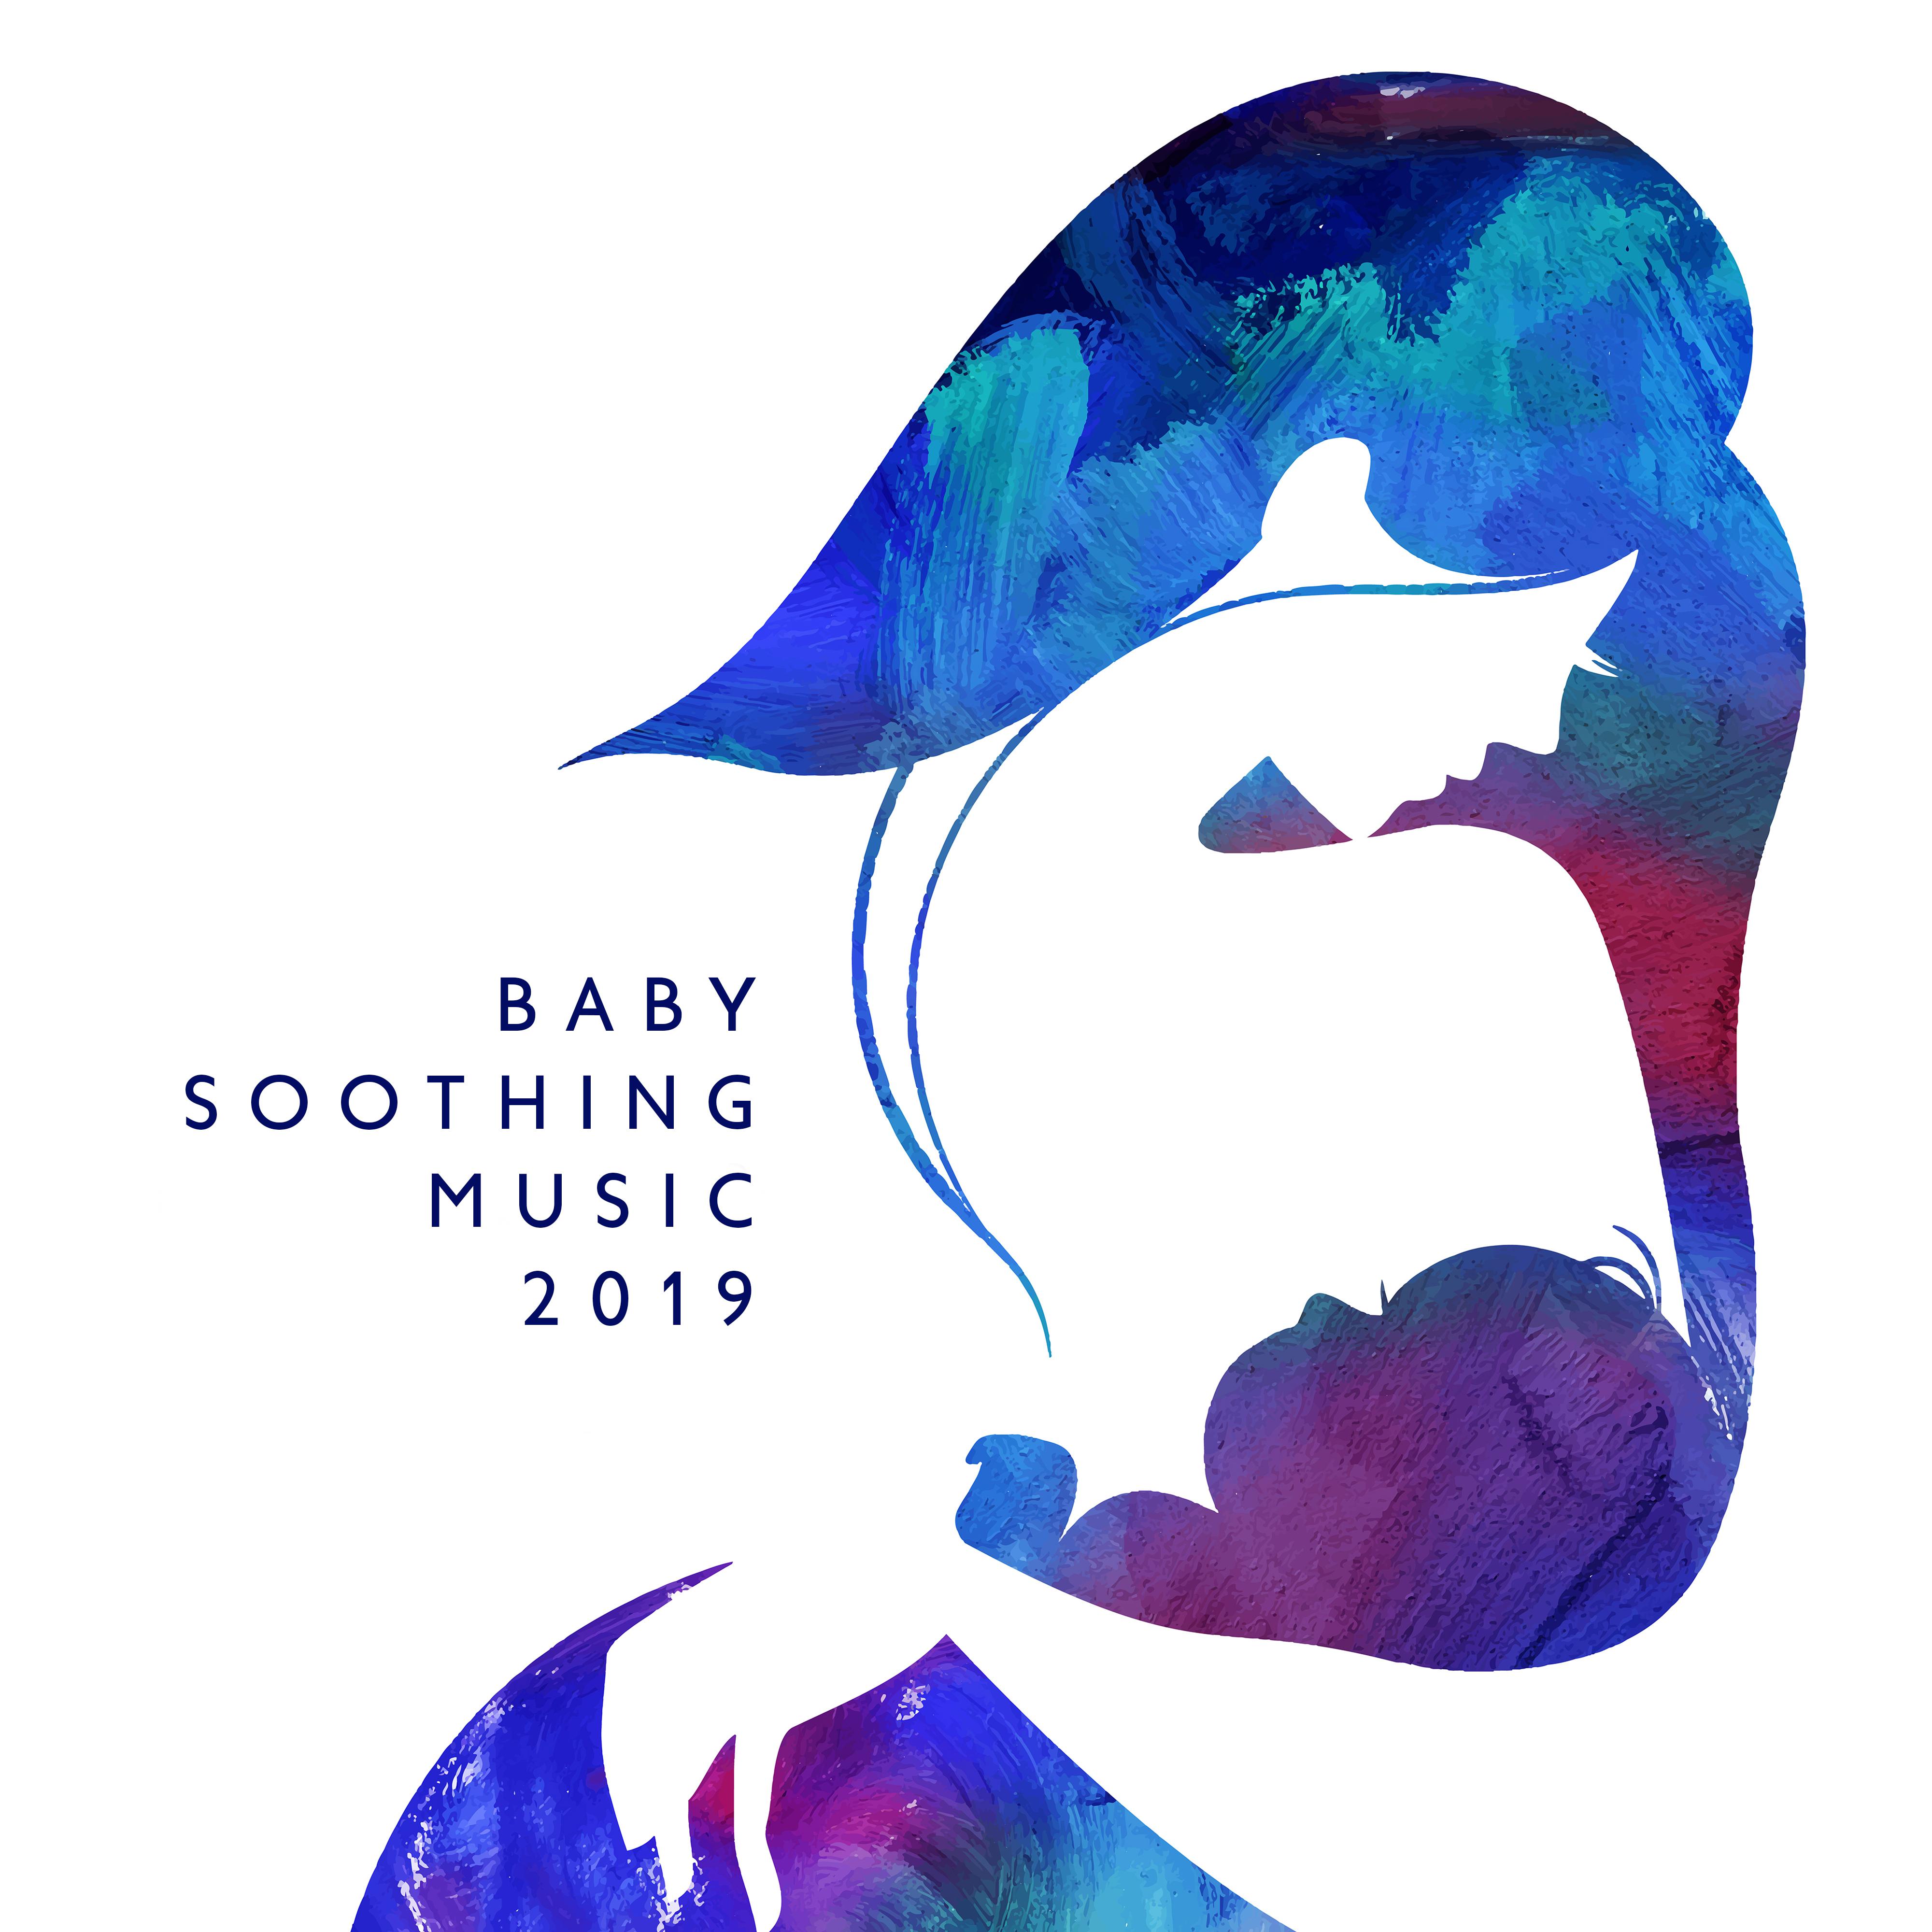 Baby Soothing Music 2019